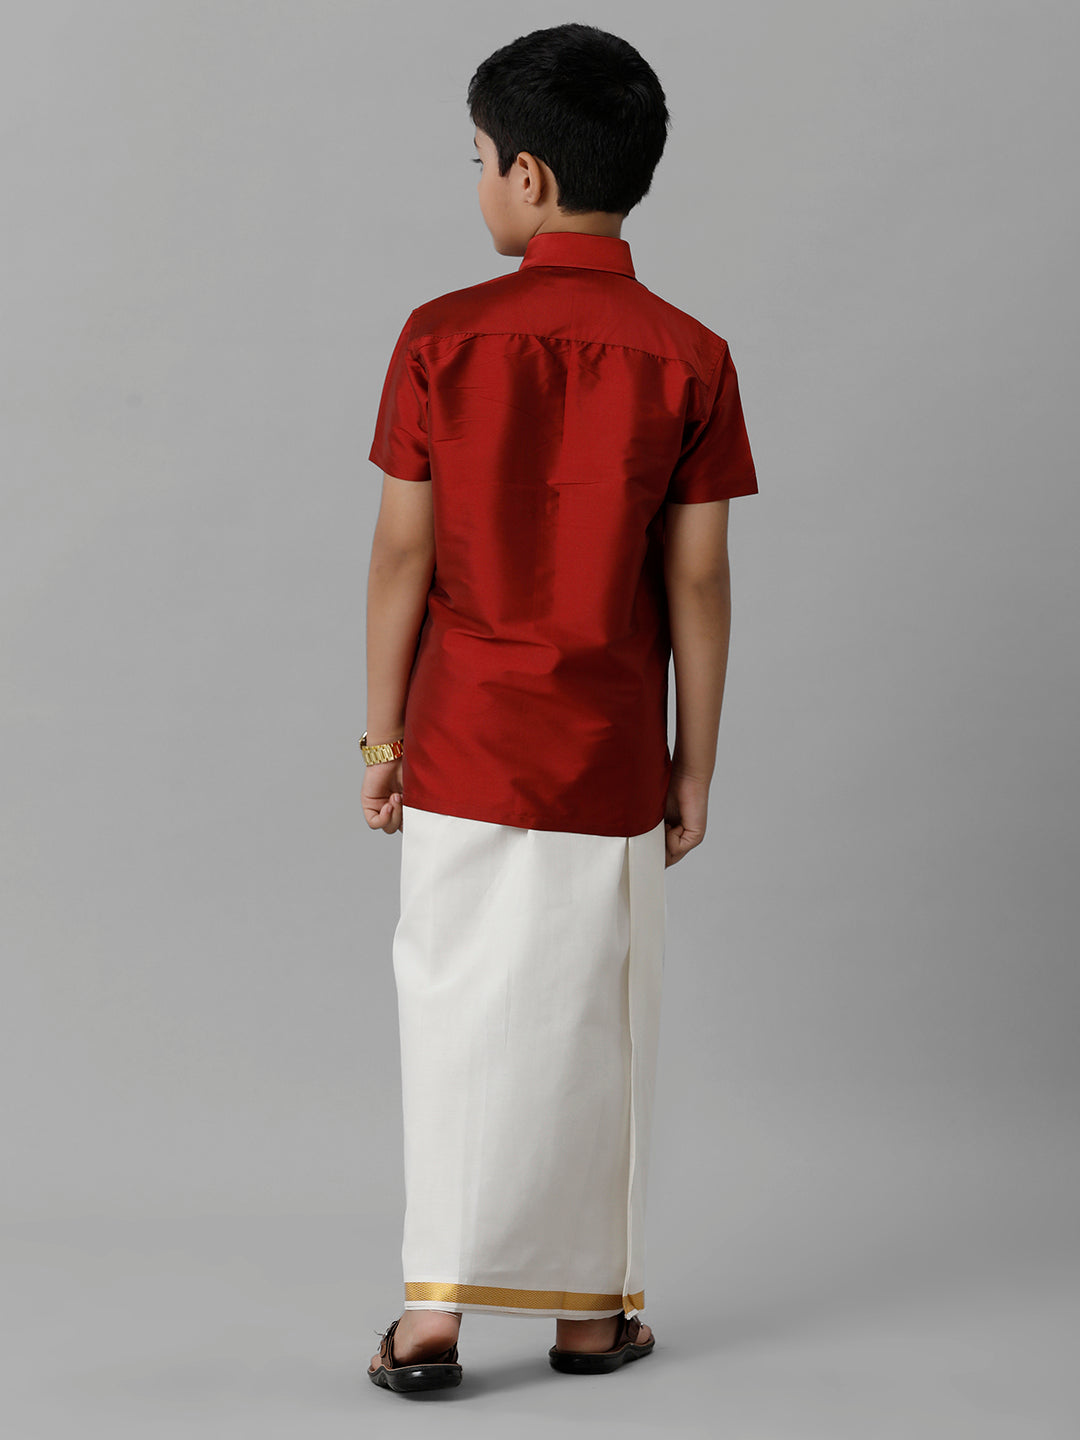 Boys Silk Cotton Red Half Sleeves Shirt with Adjustable Cream Dhoti Combo K8-Bck view